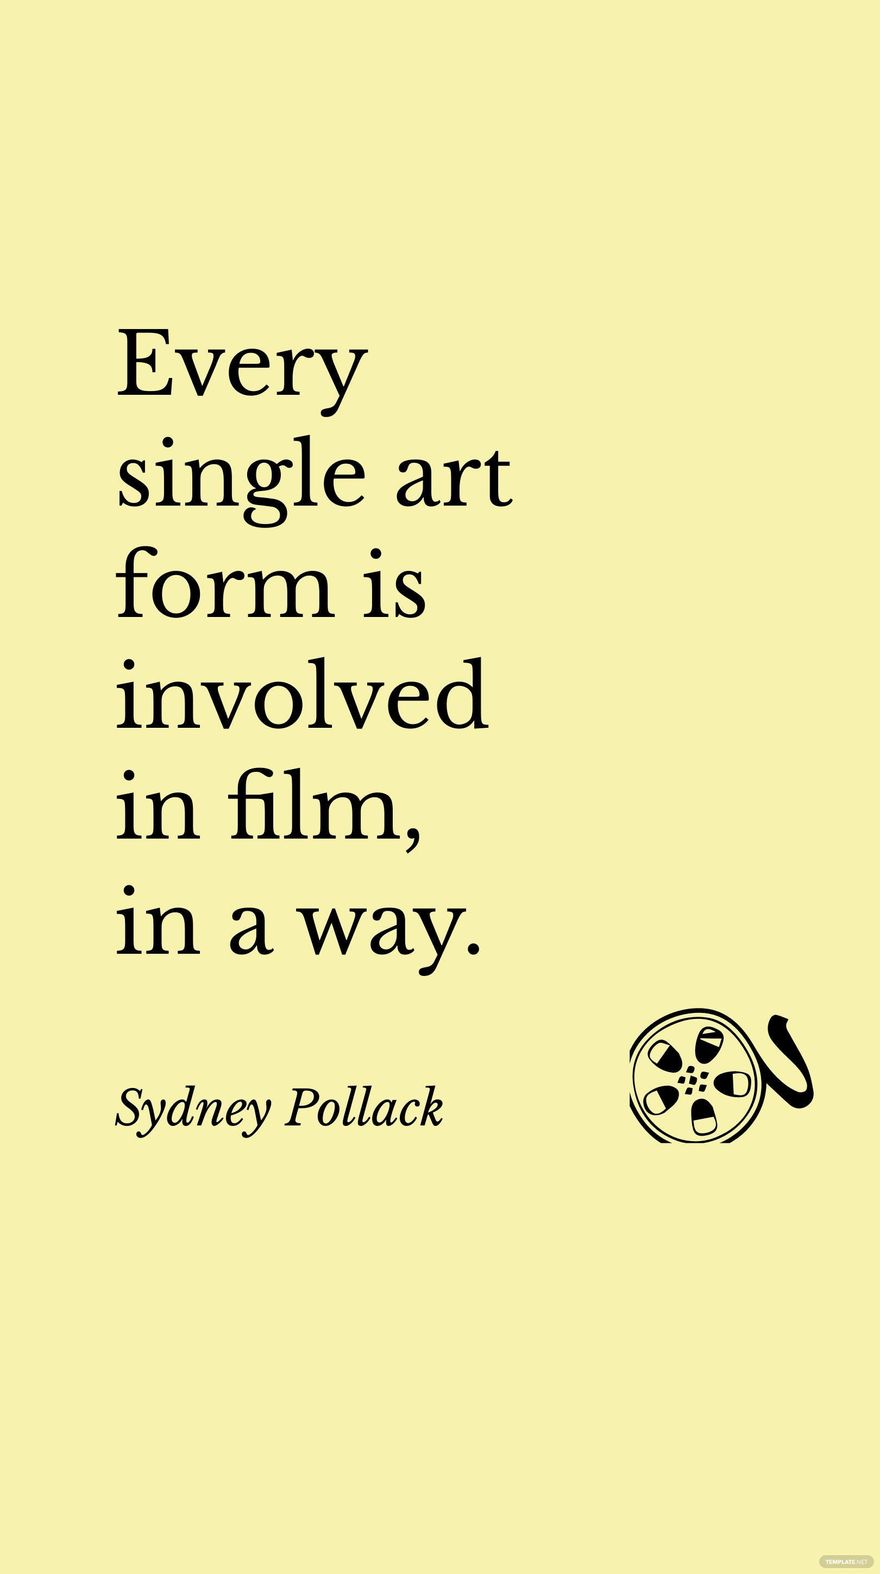 Sydney Pollack - Every single art form is involved in film, in a way.